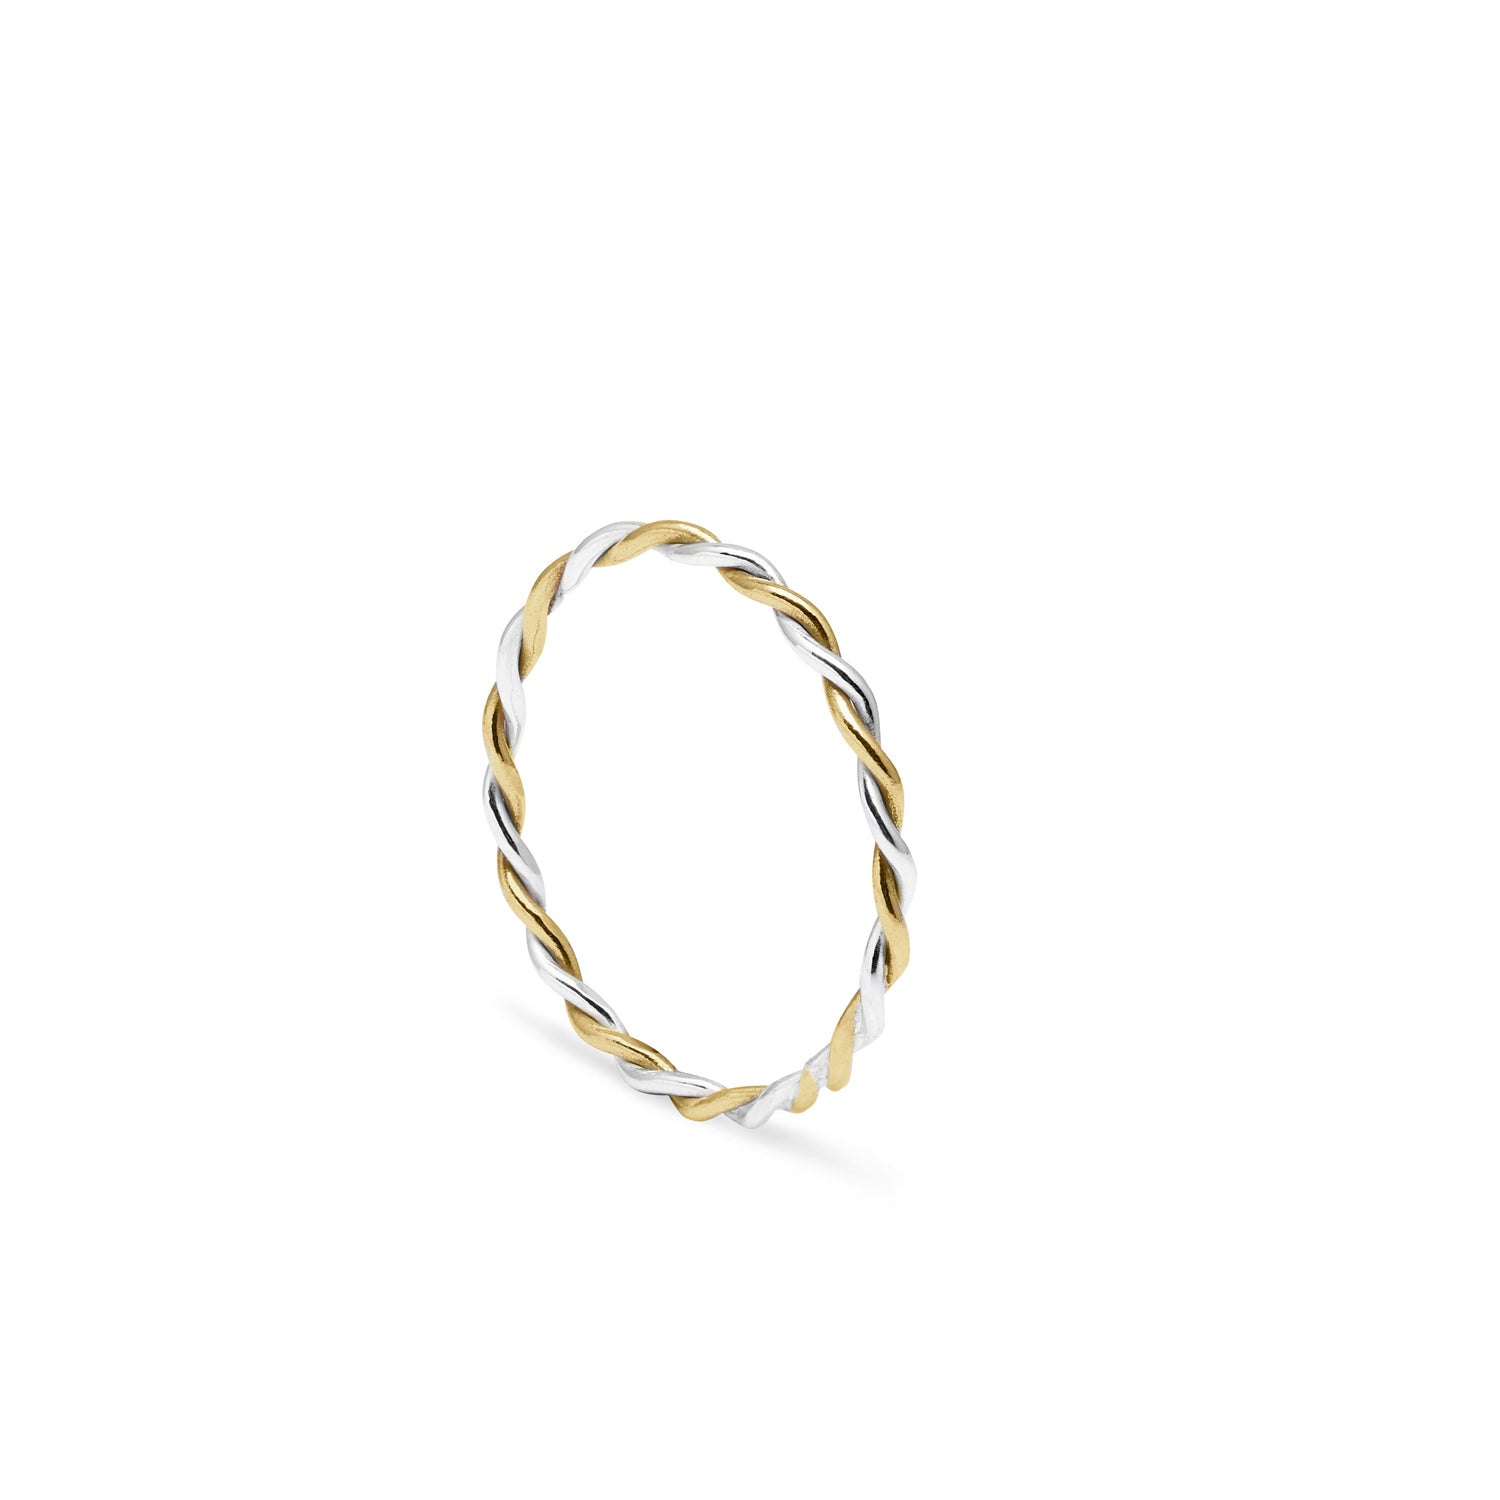 Two-tone Twist Stacking Ring - 9k Yellow & White Gold - Myia Bonner Jewellery